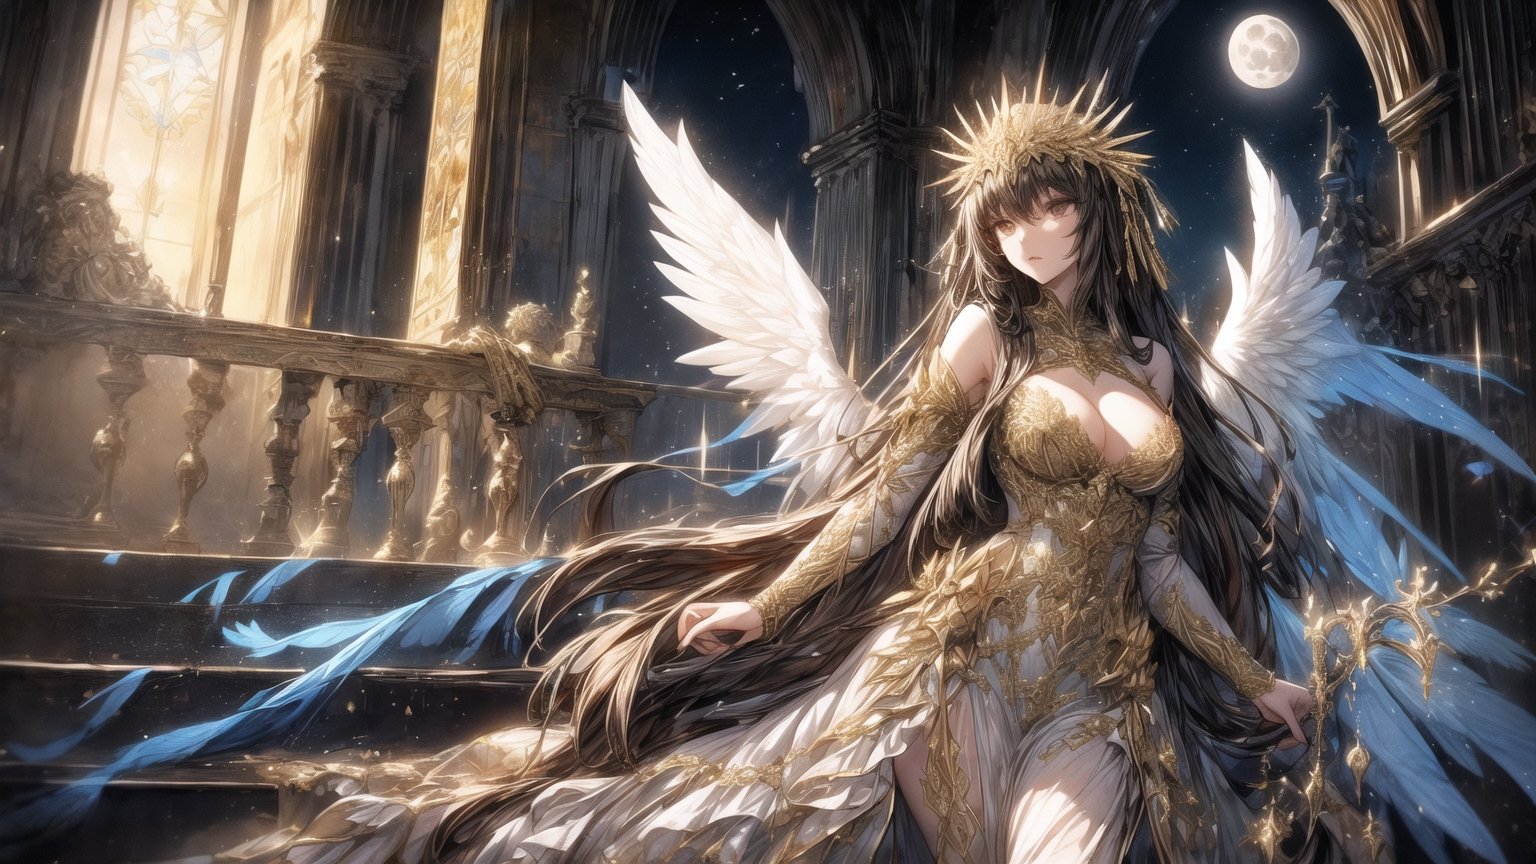 Angels, goddesses, golden embroidery, long dresses, frills,
big white wings, iron mask
Cathedral,
Stained glass,
full moon,